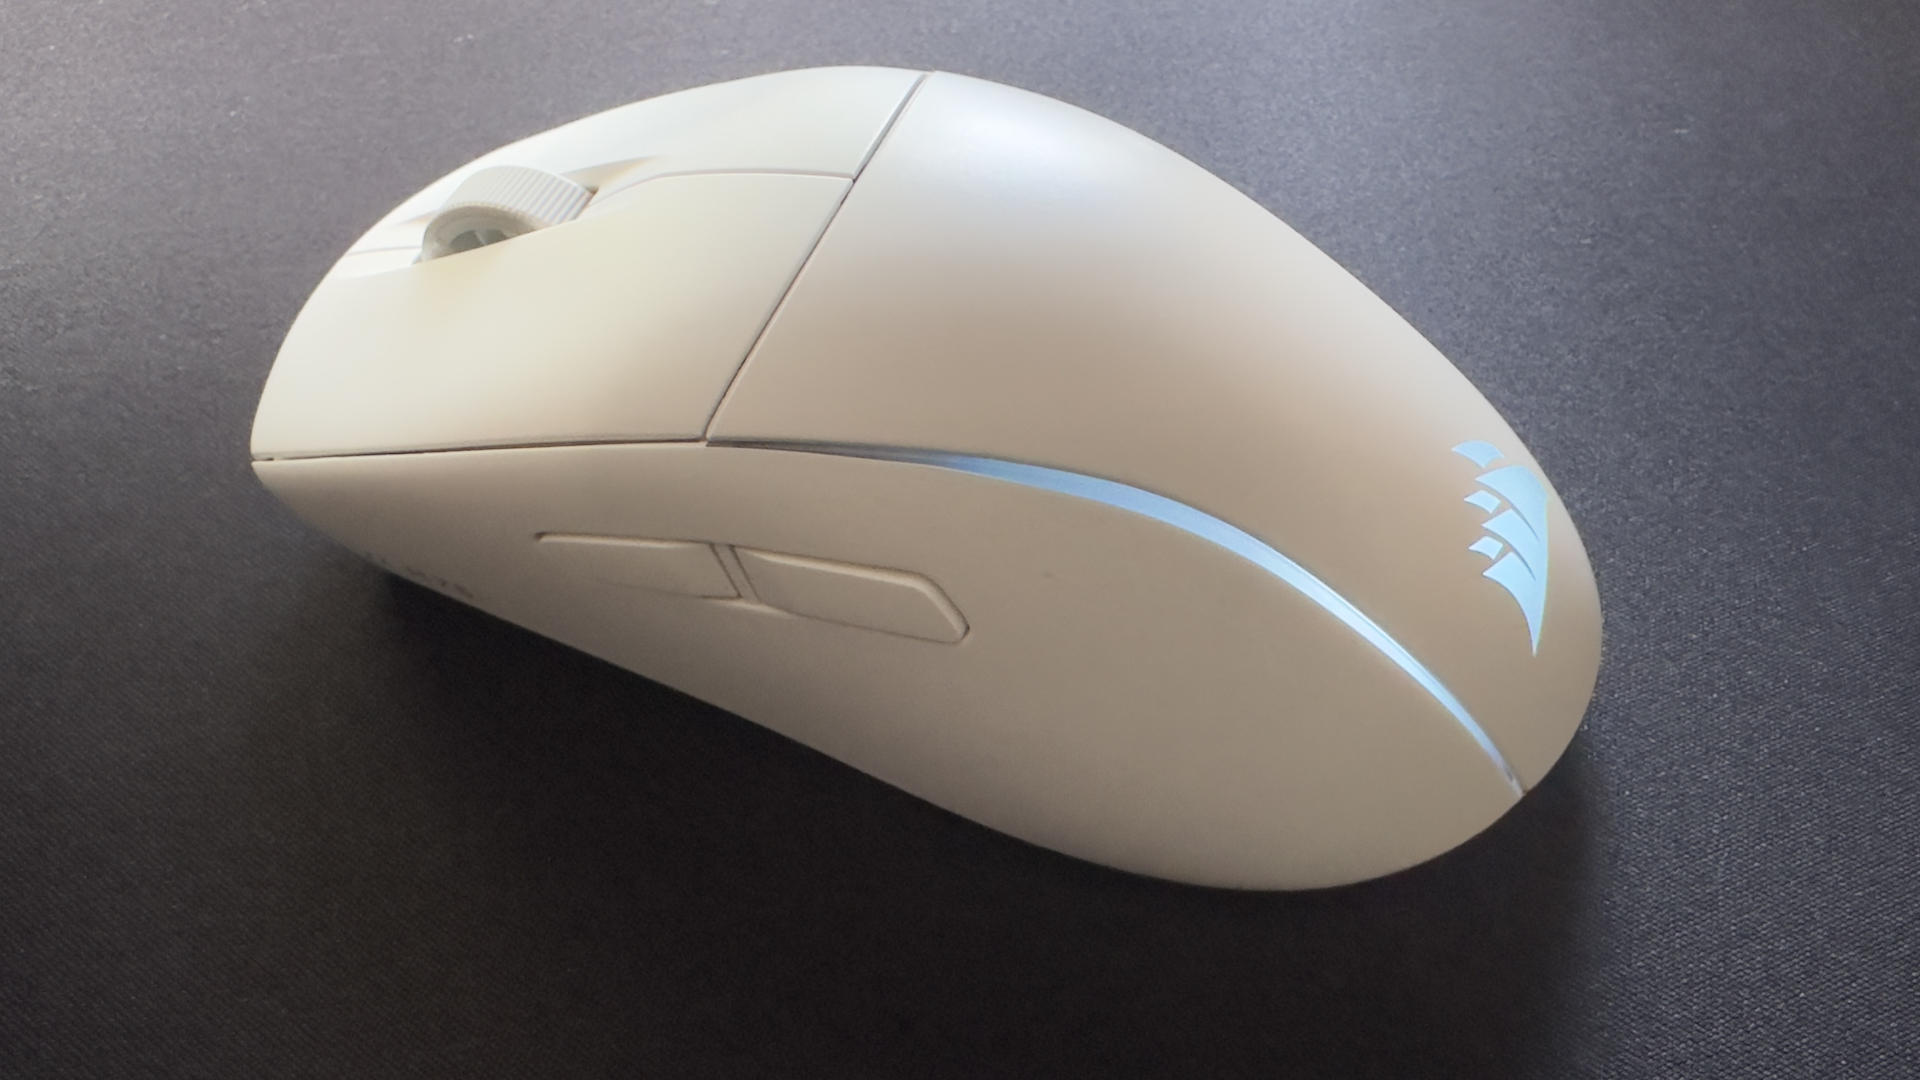 A photo of a Corsair M75 Wireless gaming mouse